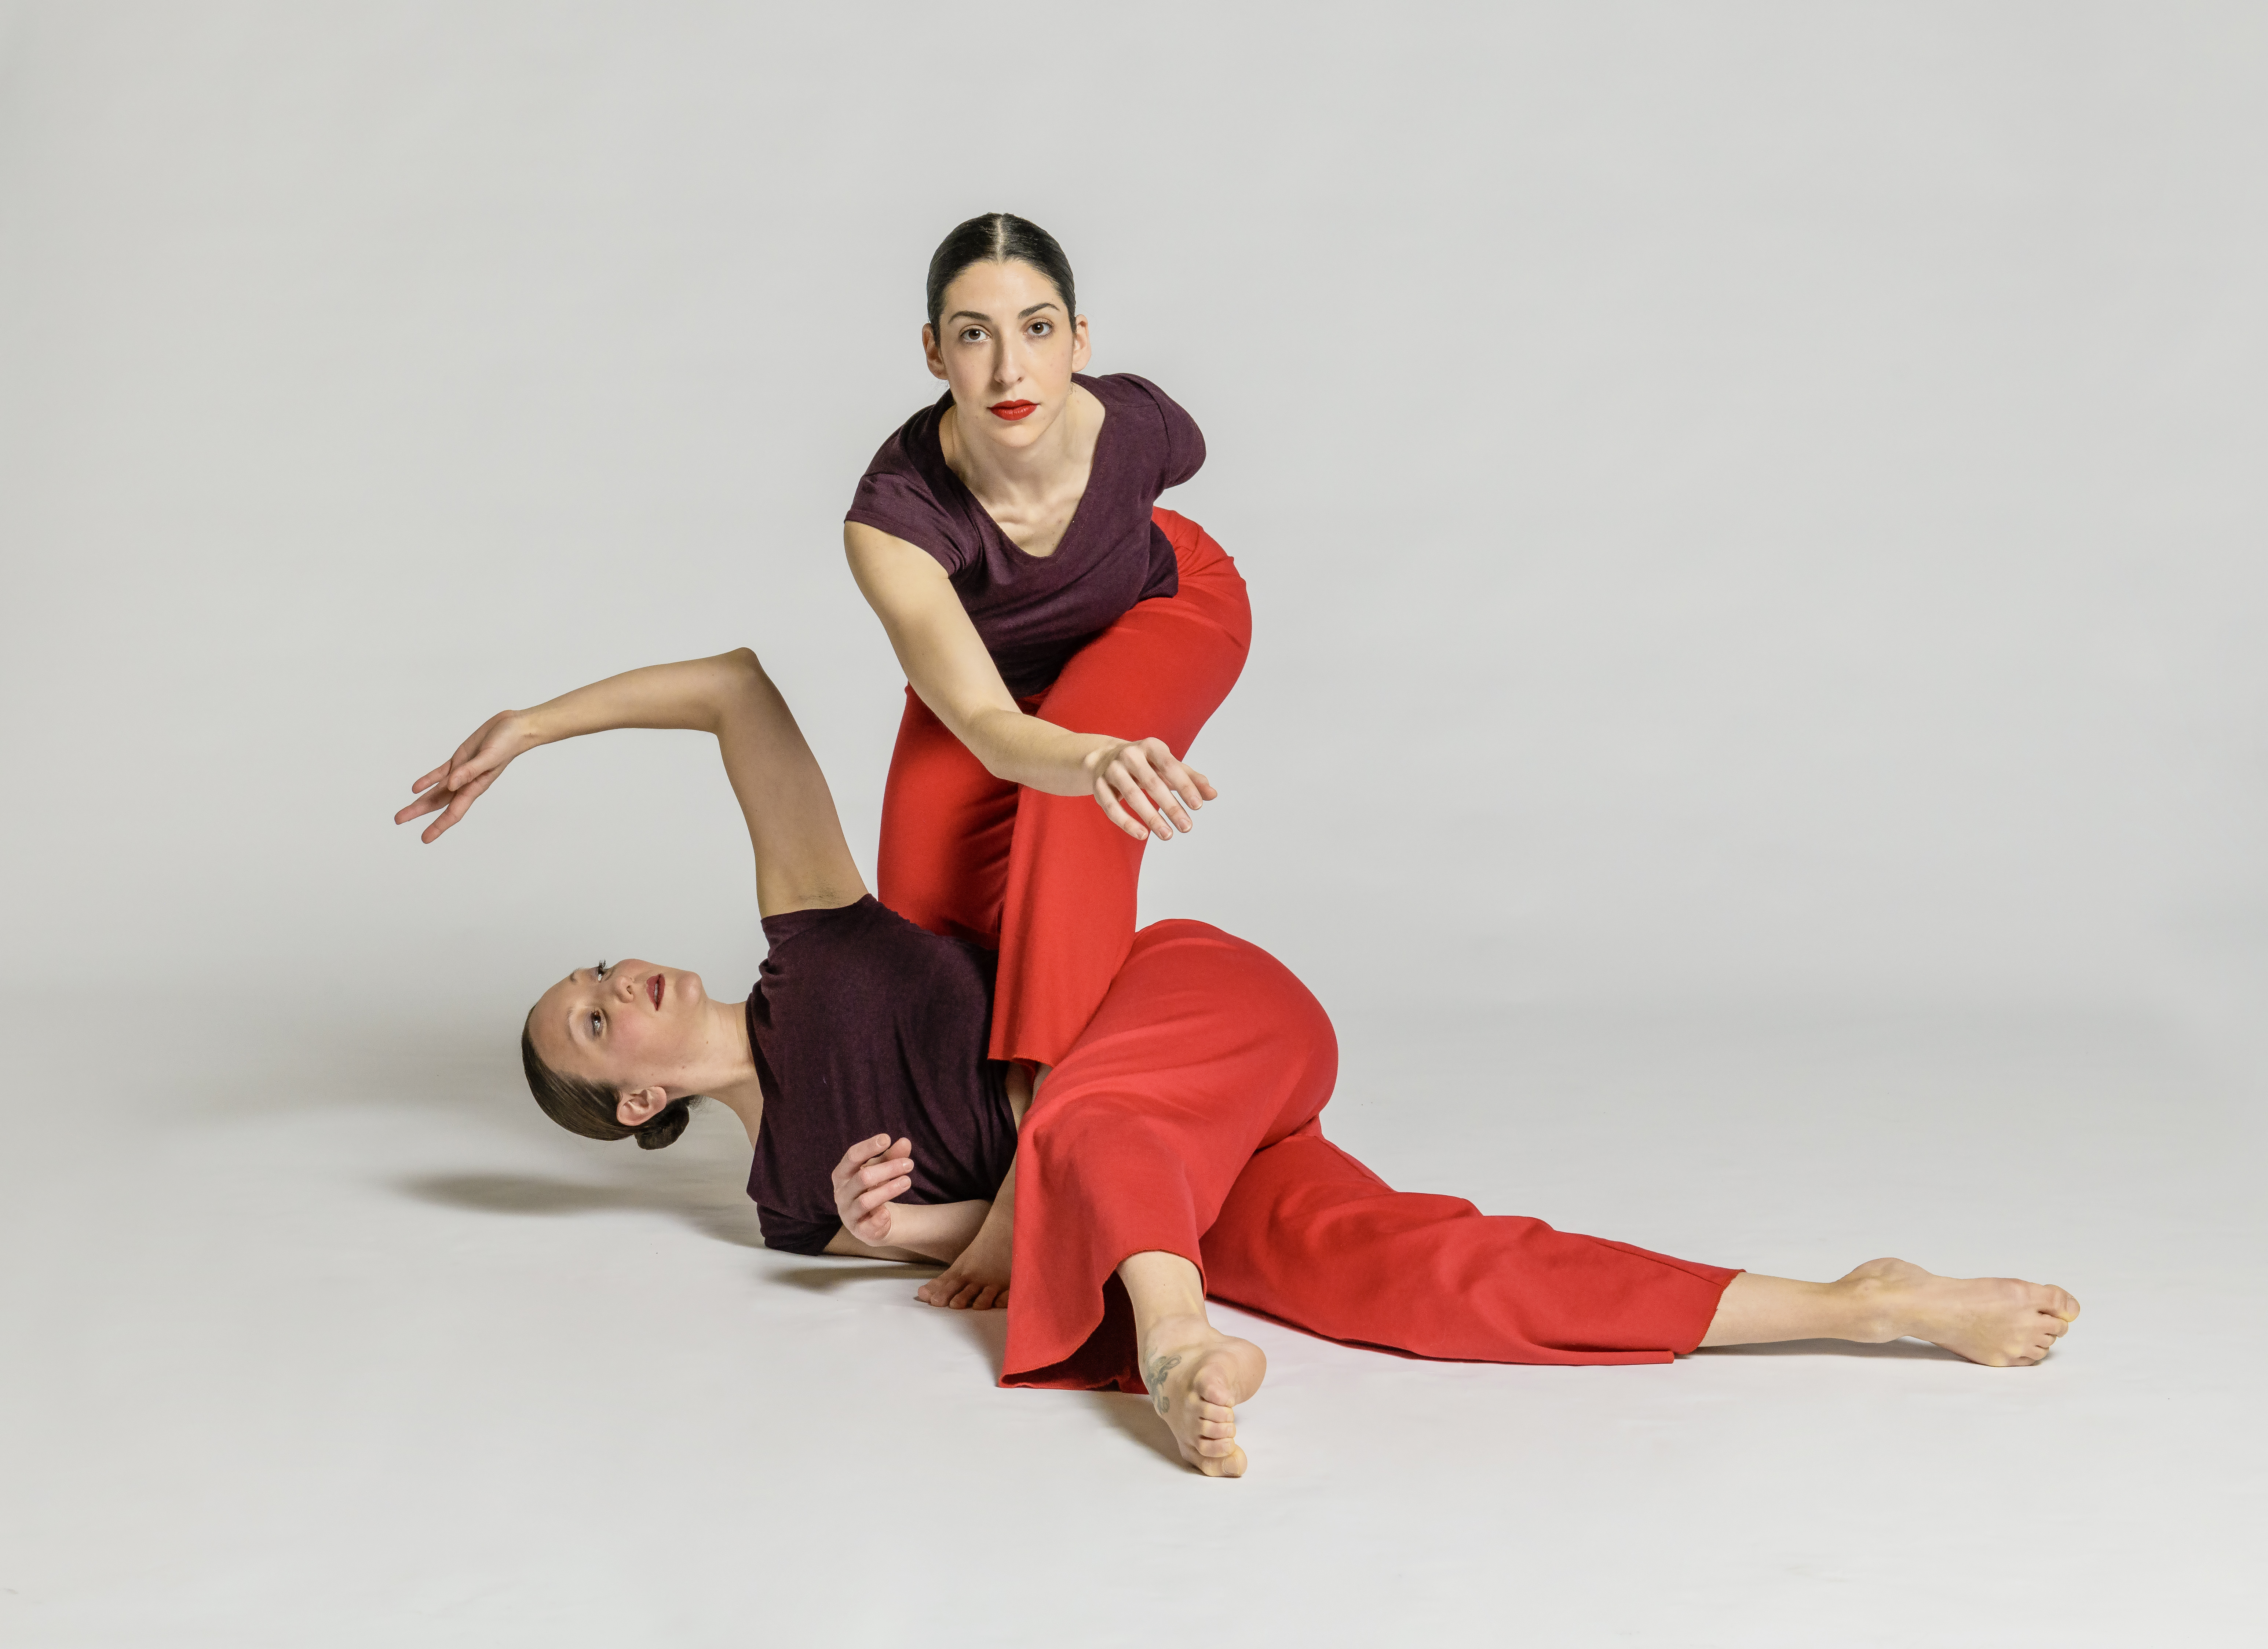 two dancers in red are intertwined wit one standing and the other on the floor